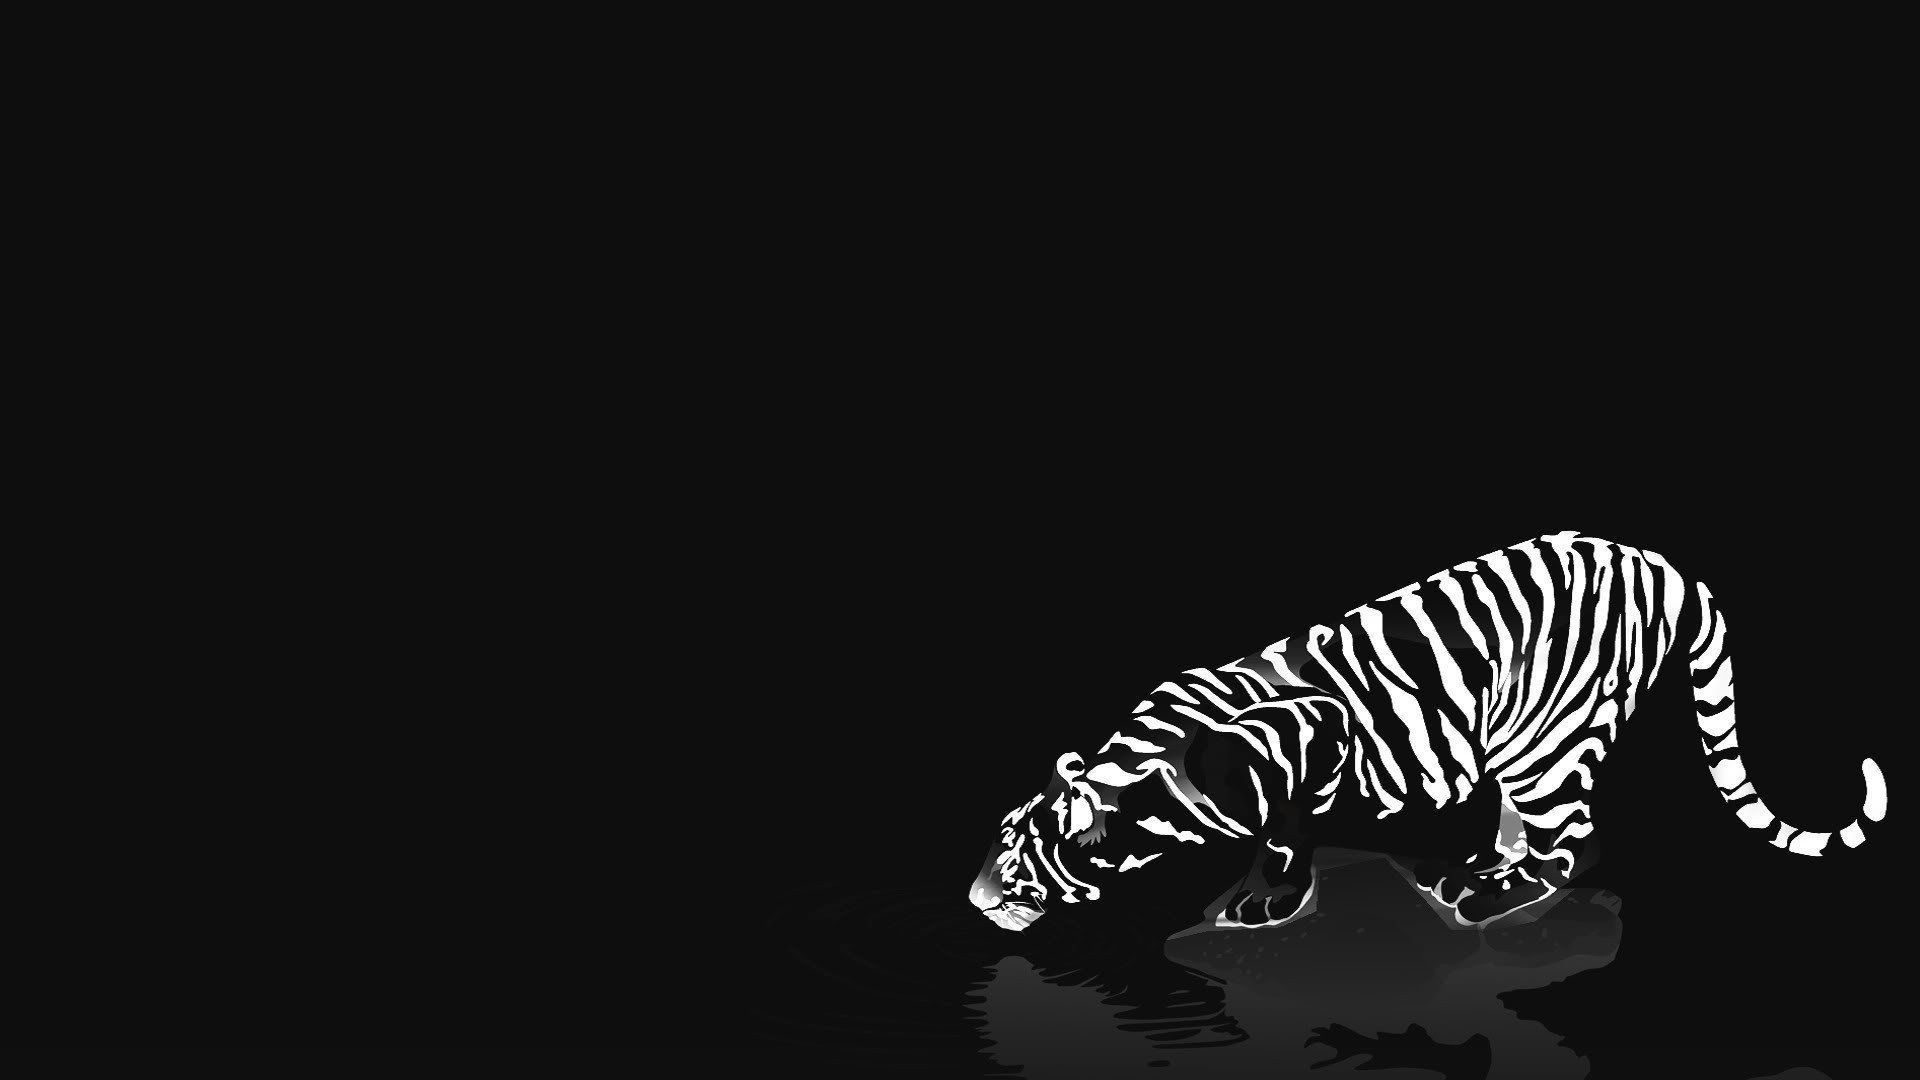 Cats animals tigers white tiger reflections black background ...